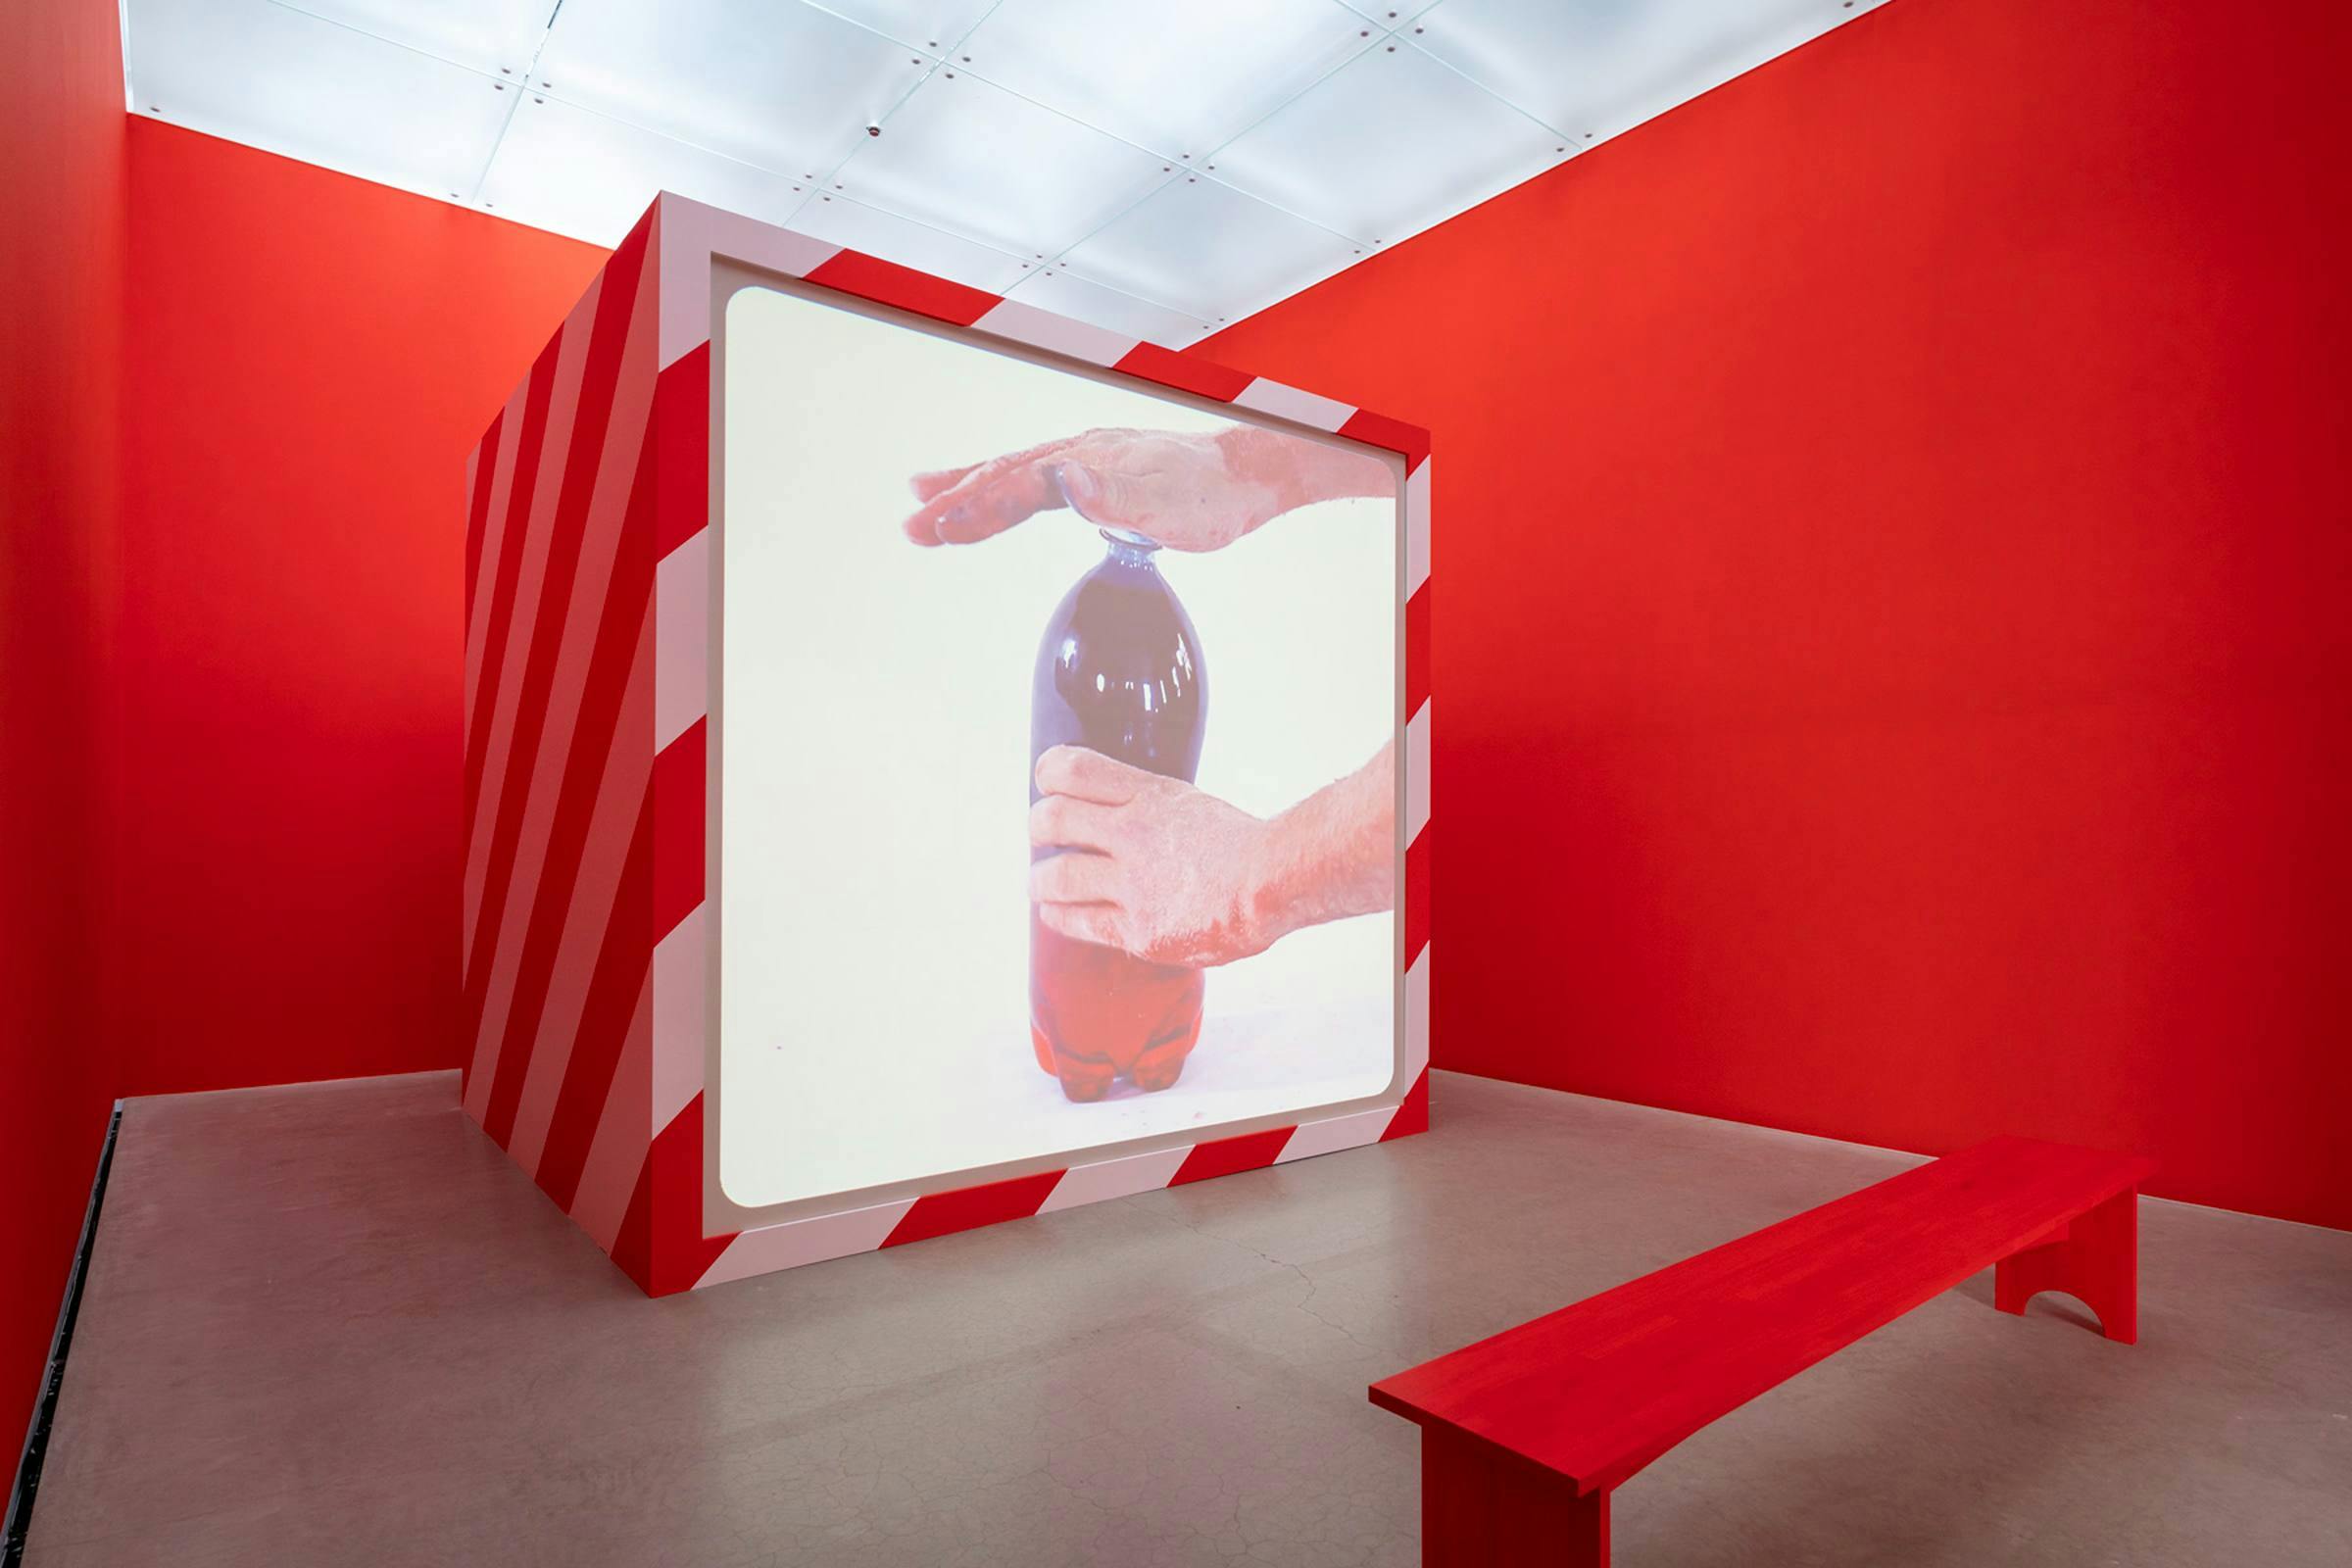 Projection of a deep red bottle. ofliquid being held in a red painted gallery room with a red bench in front of the screen.